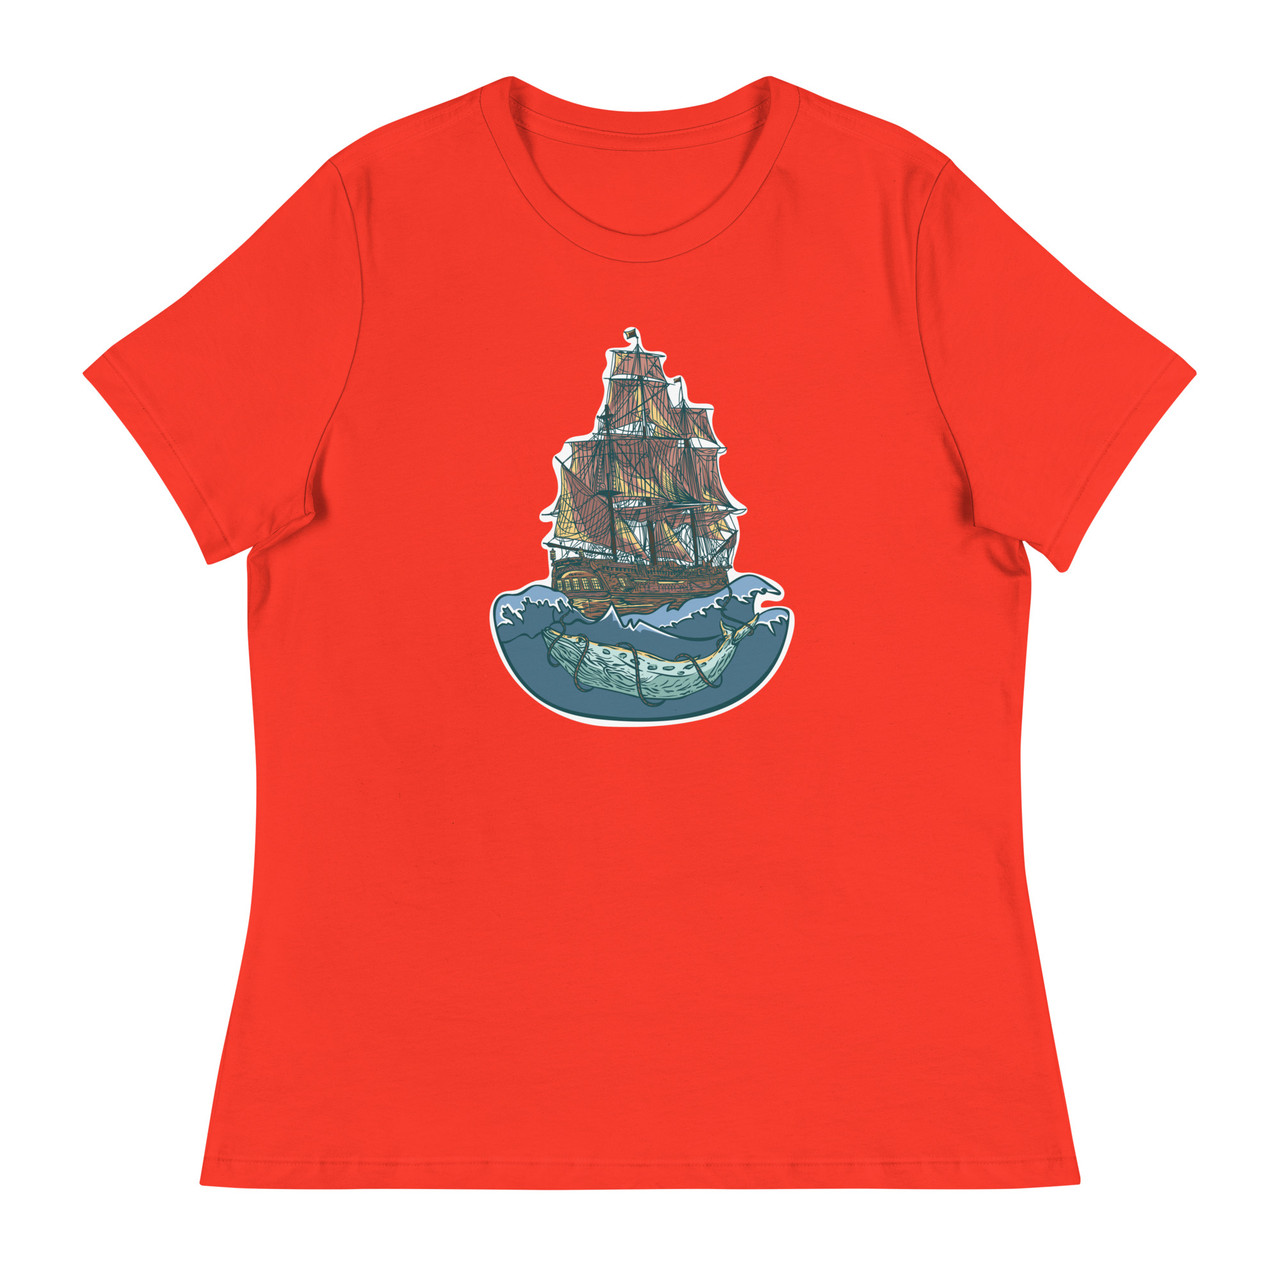 Whale of a Ship Women's Relaxed T-Shirt - Bella + Canvas 6400 